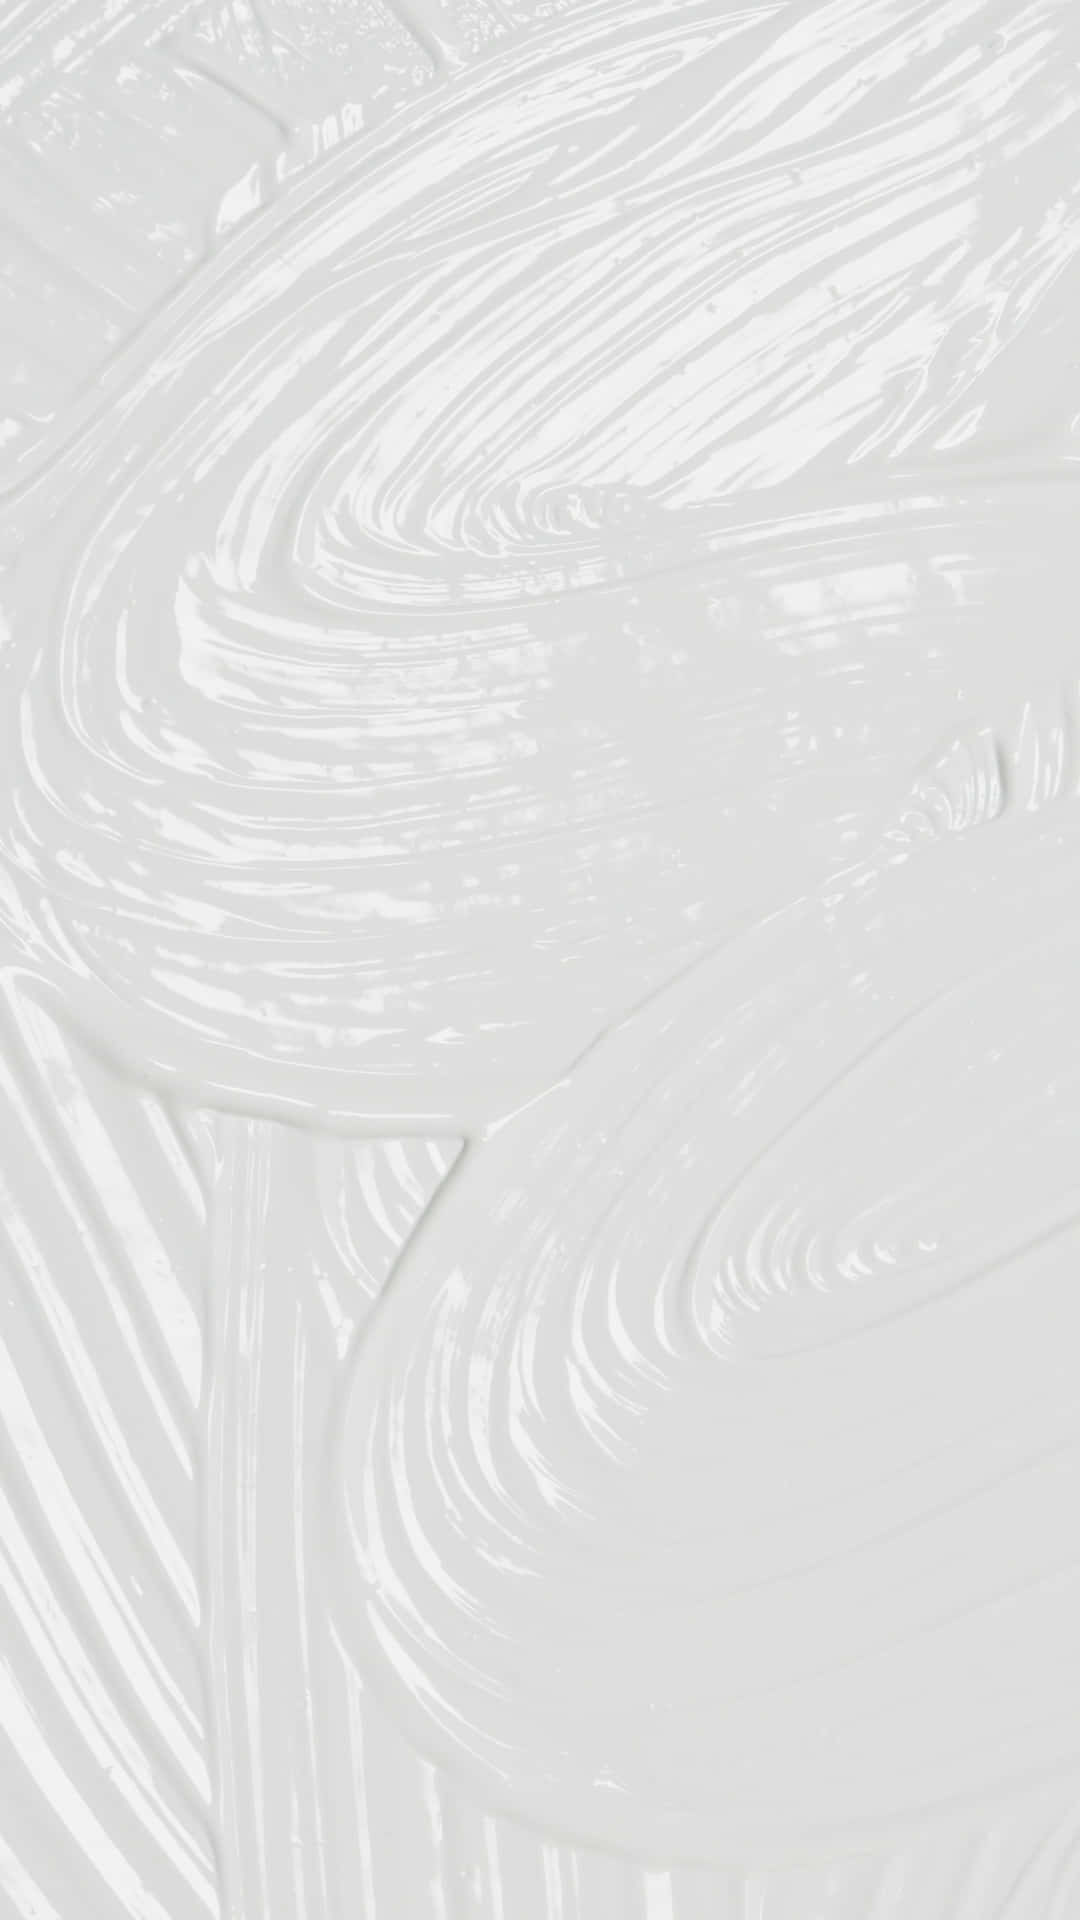 A White Paint Texture With Swirls